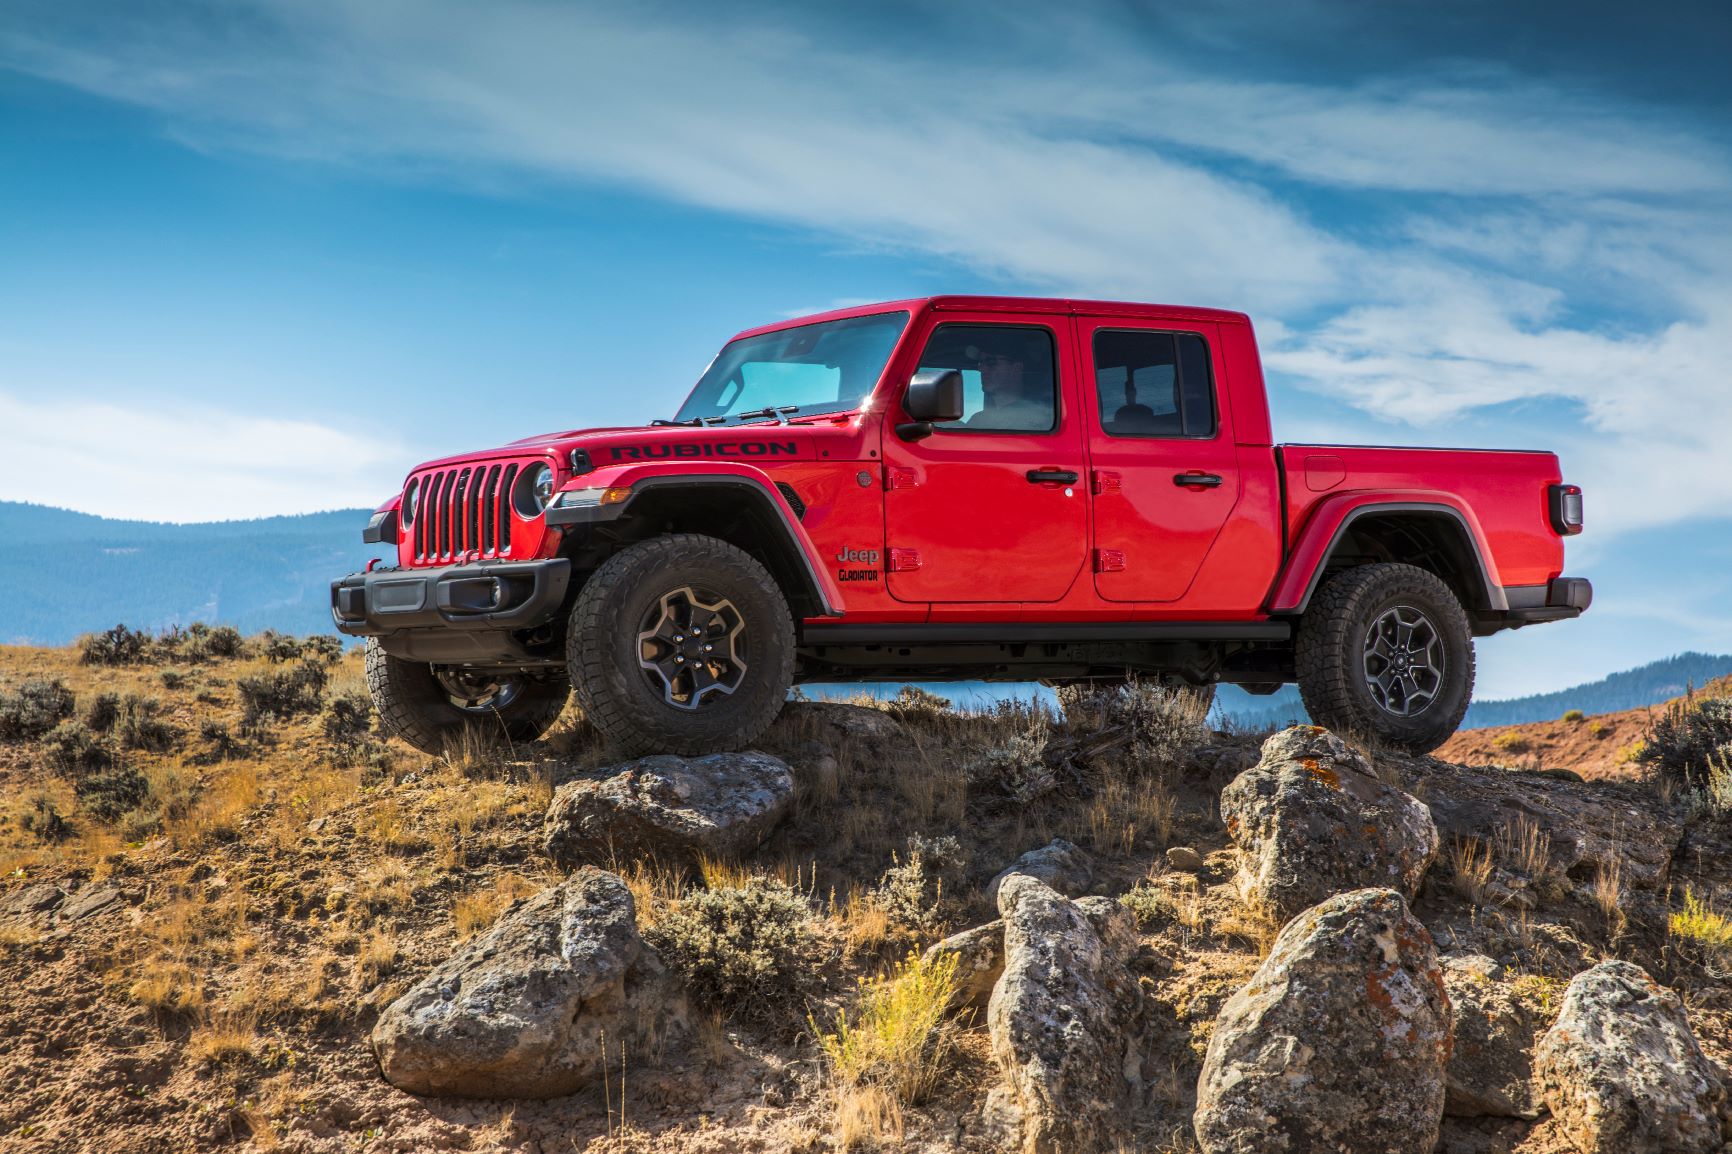 2020 Jeep Gladiator Wins North American Truck of the Year | THE SHOP